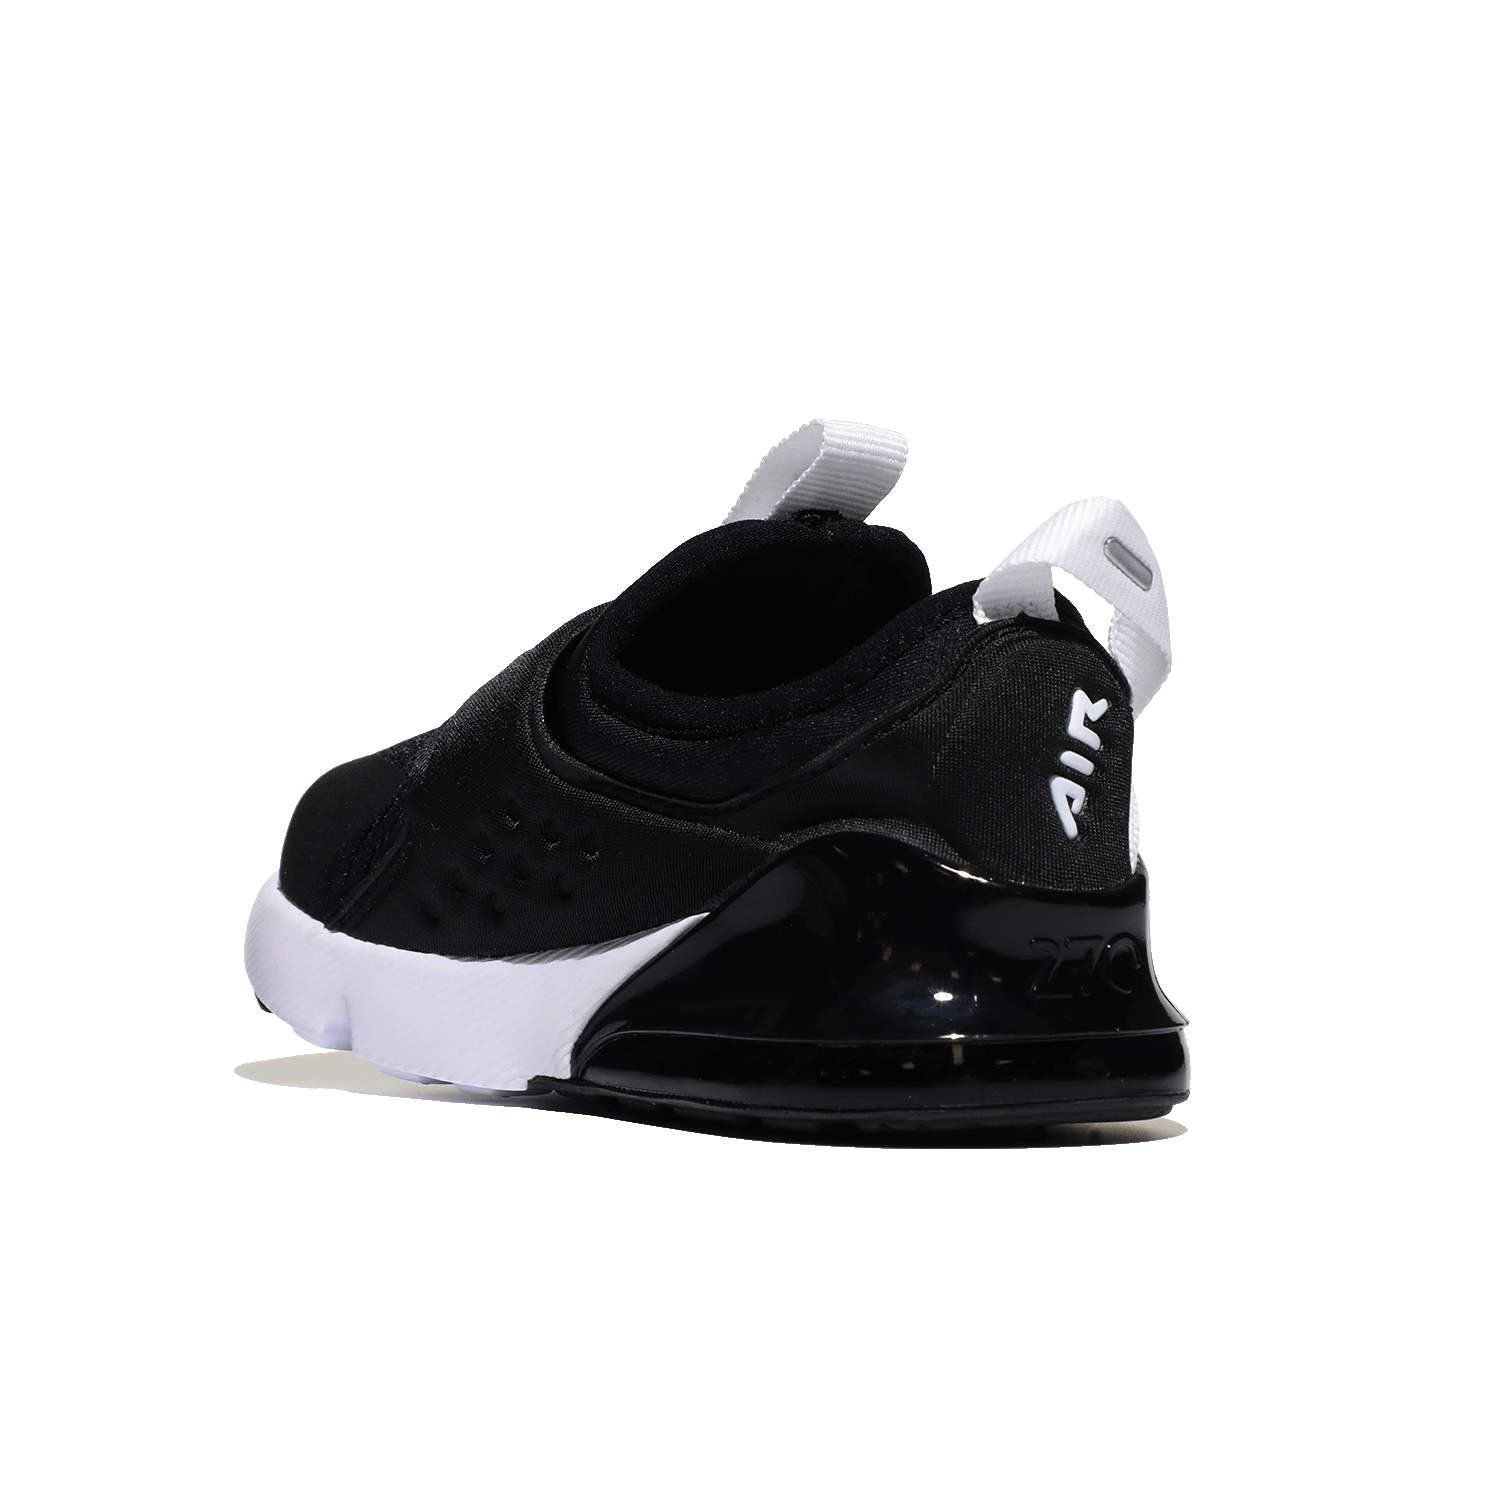 Image 7 of Air Max 270 Extreme (Infant/Toddler)